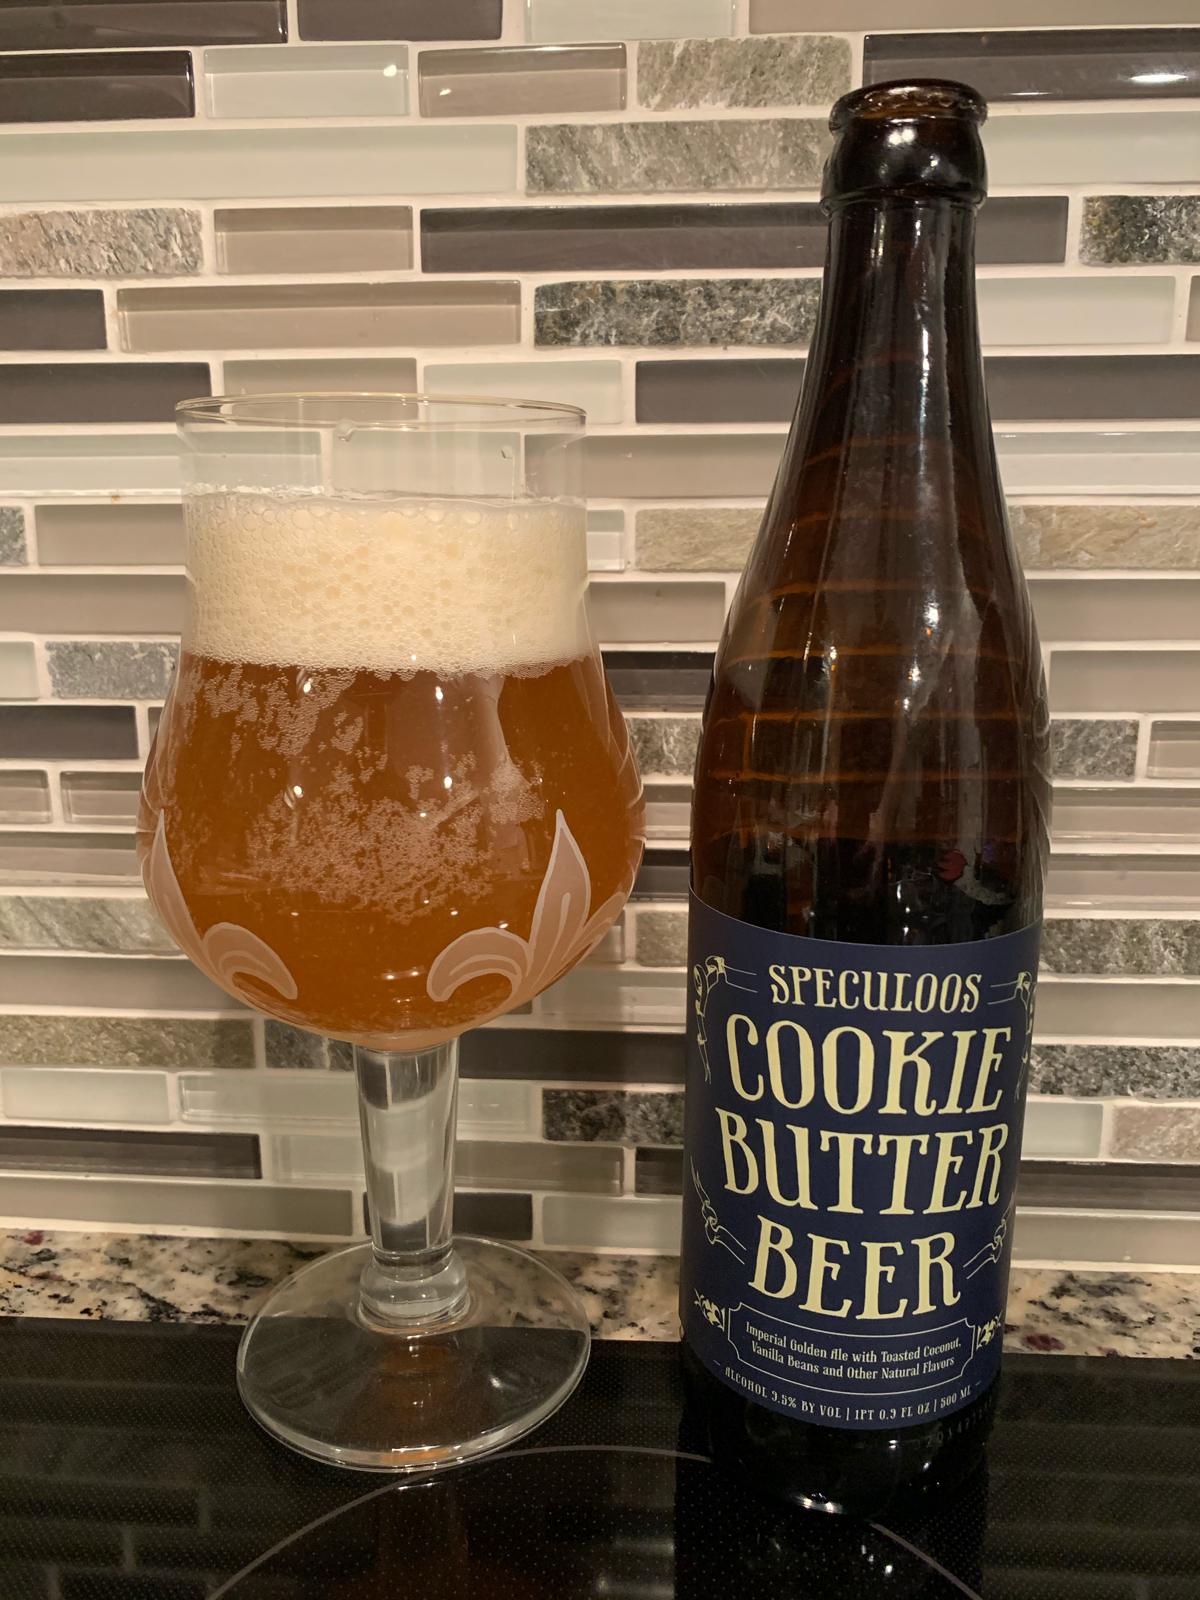 Speculoos Cookie Butter Beer